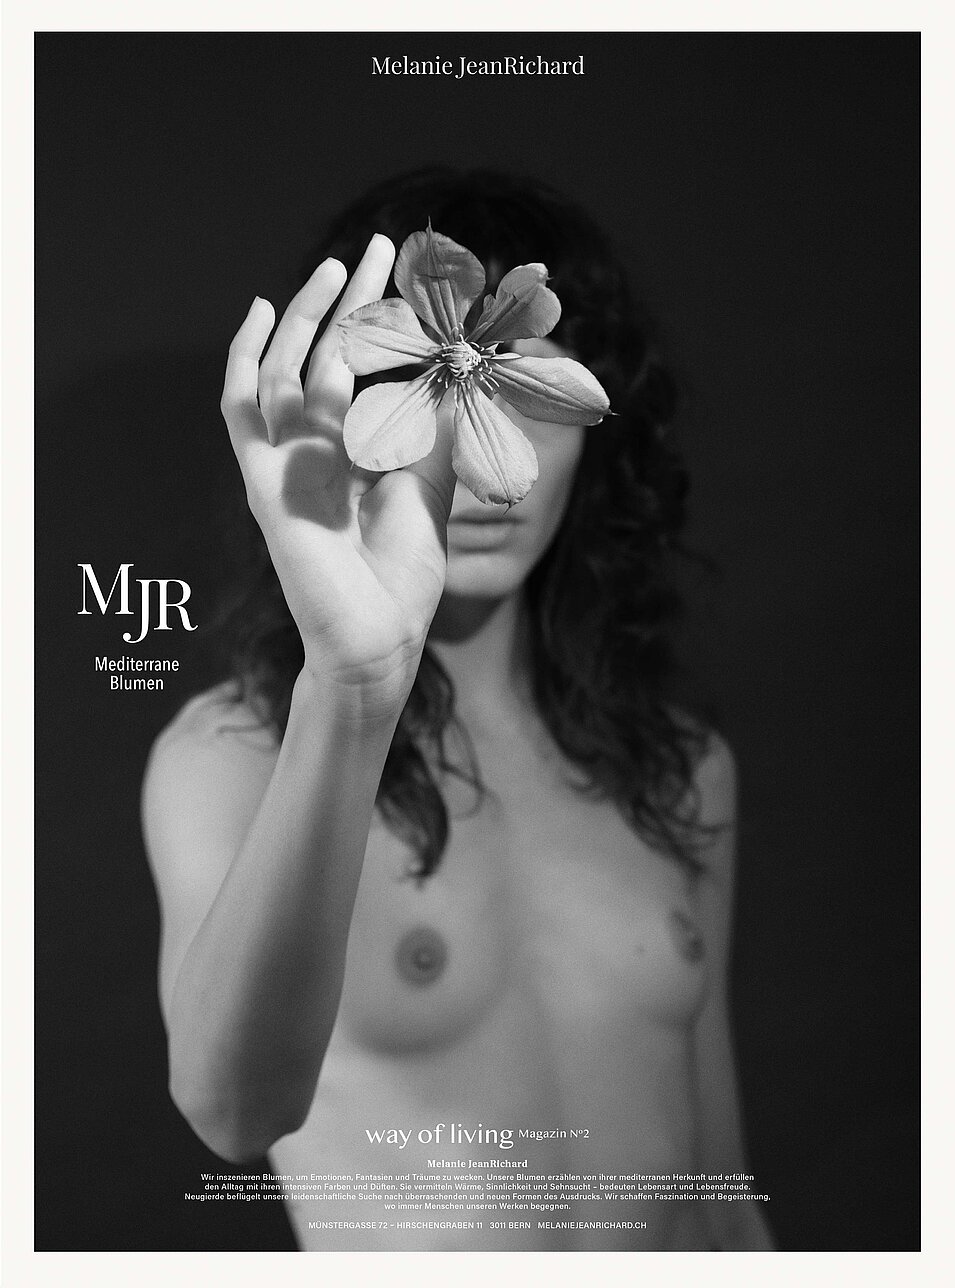 poster topless woman flower in hand advertising bern